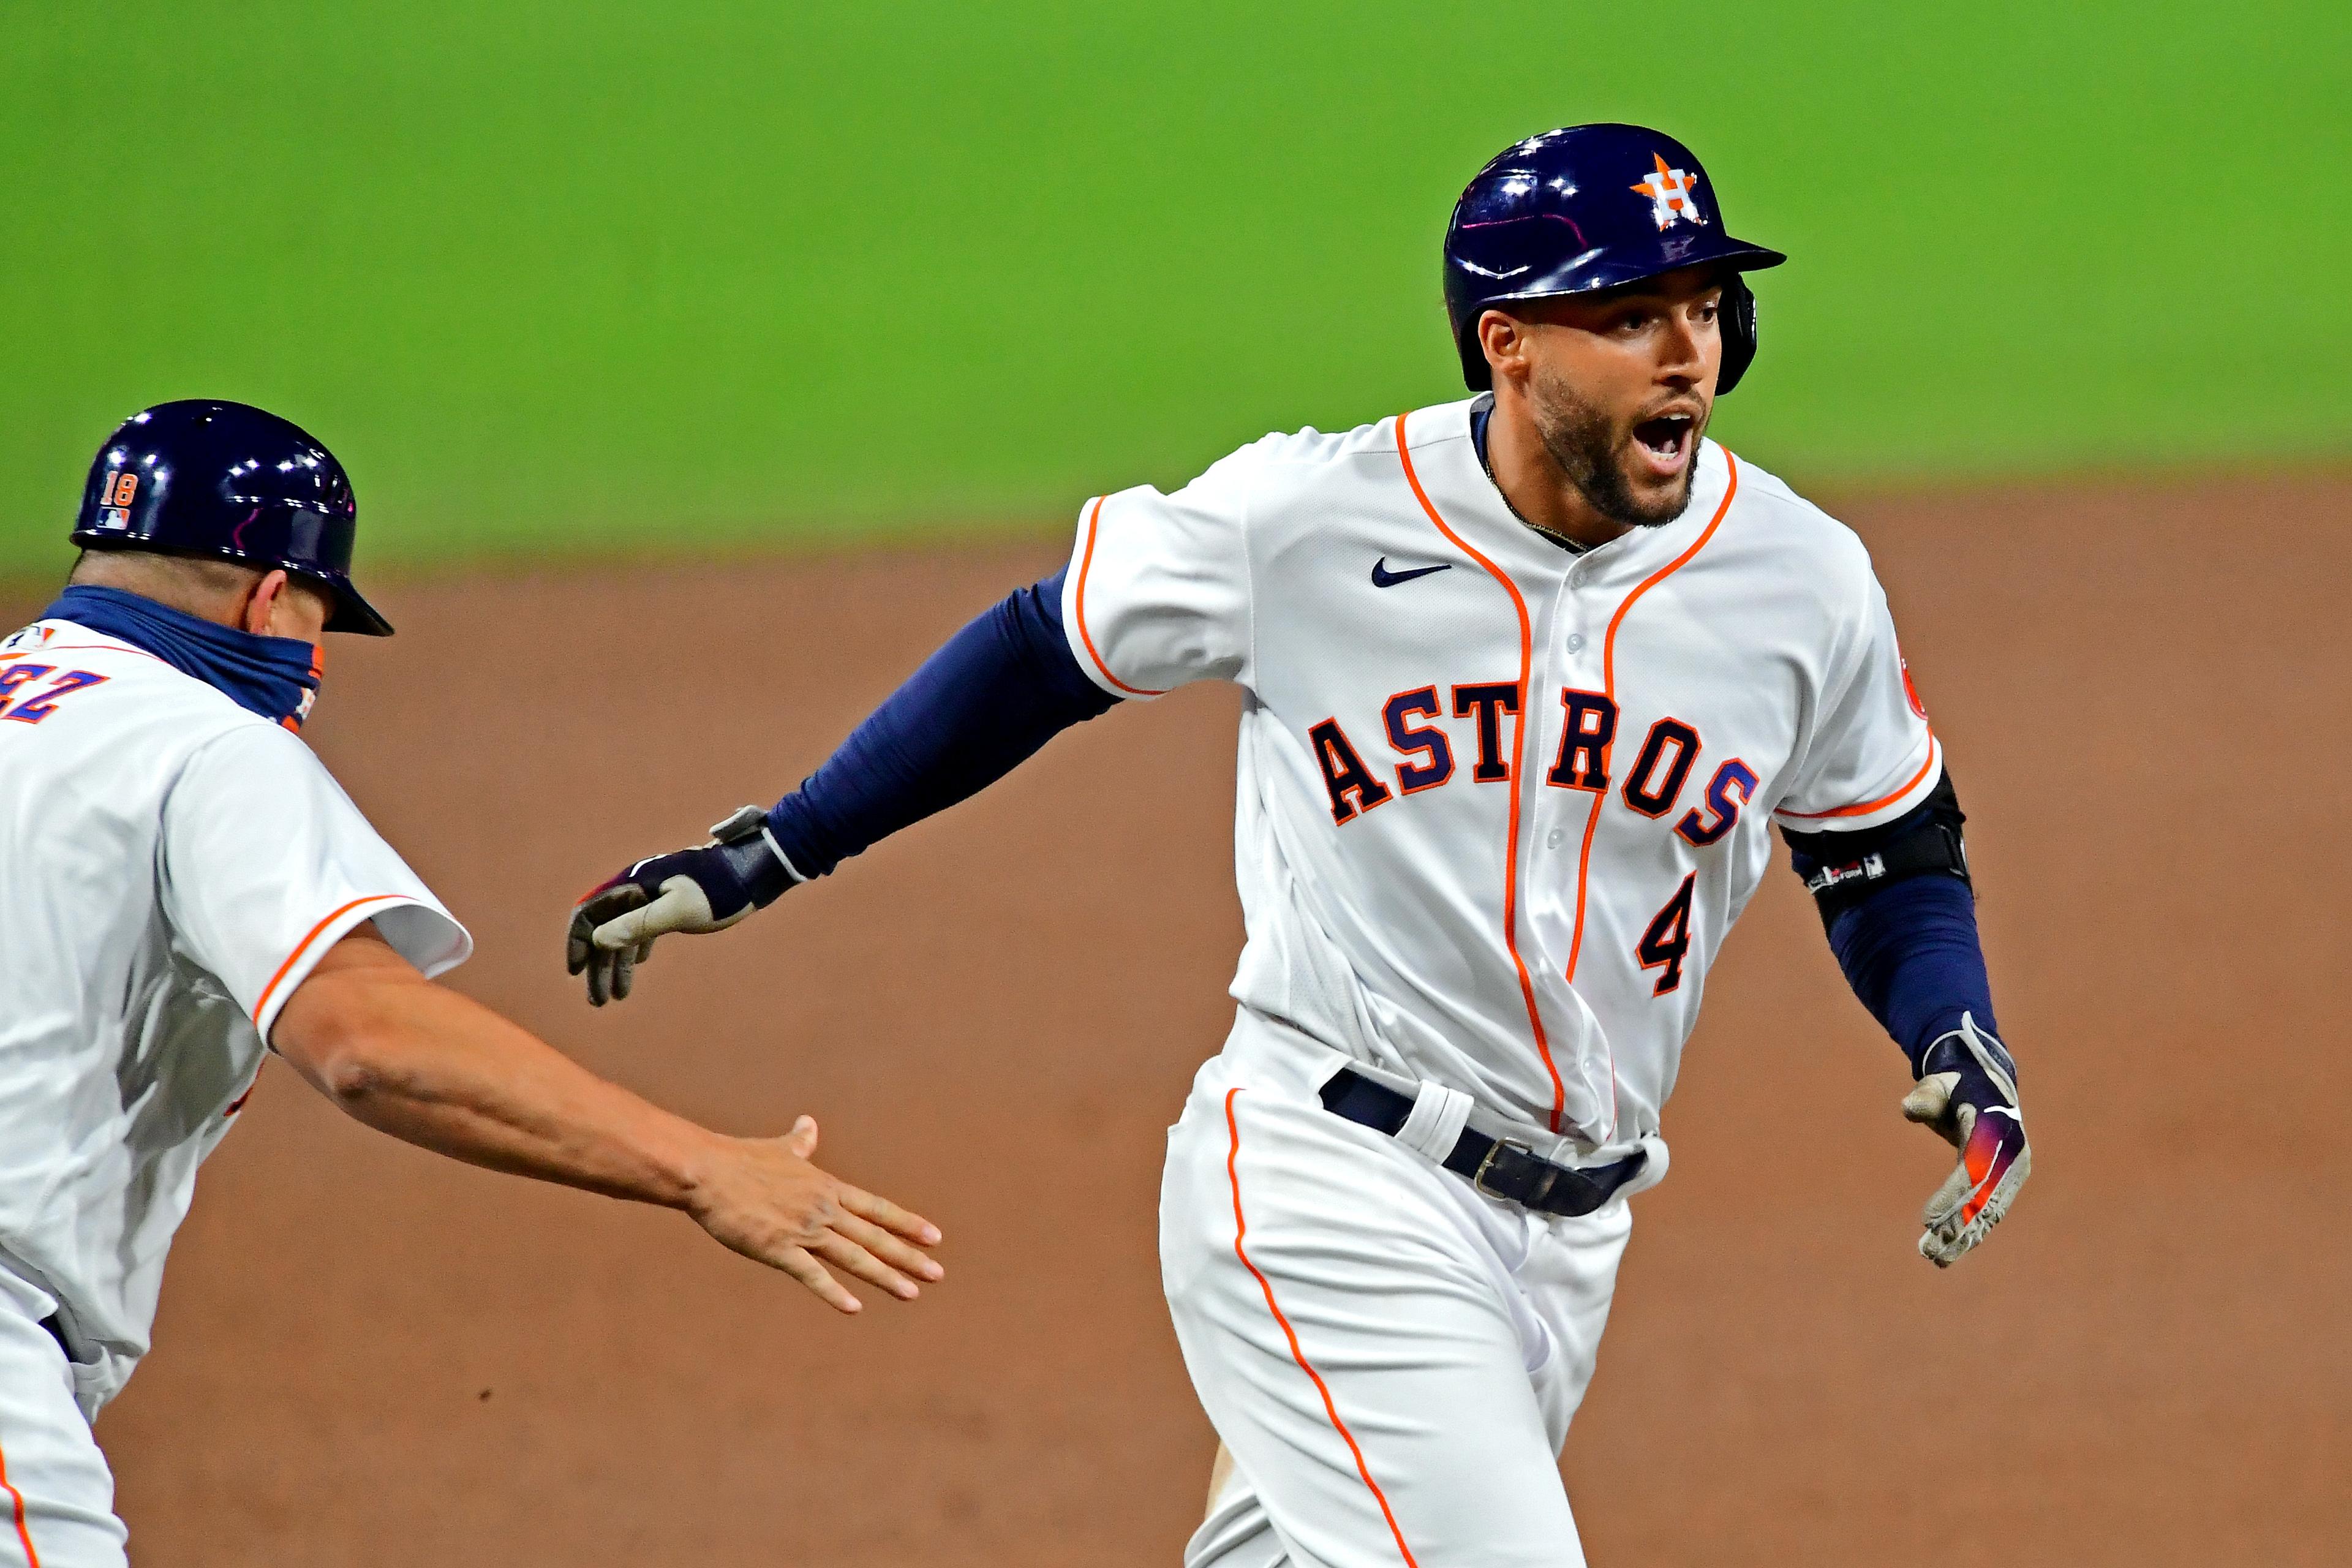 Oct 14, 2020; San Diego, California, USA; Houston Astros center fielder George Springer (4) celebrates hitting a two run home run during the fifth inning against the Tampa Bay Rays during game four of the 2020 ALCS at Petco Park. / Jayne Kamin-Oncea-USA TODAY Sports